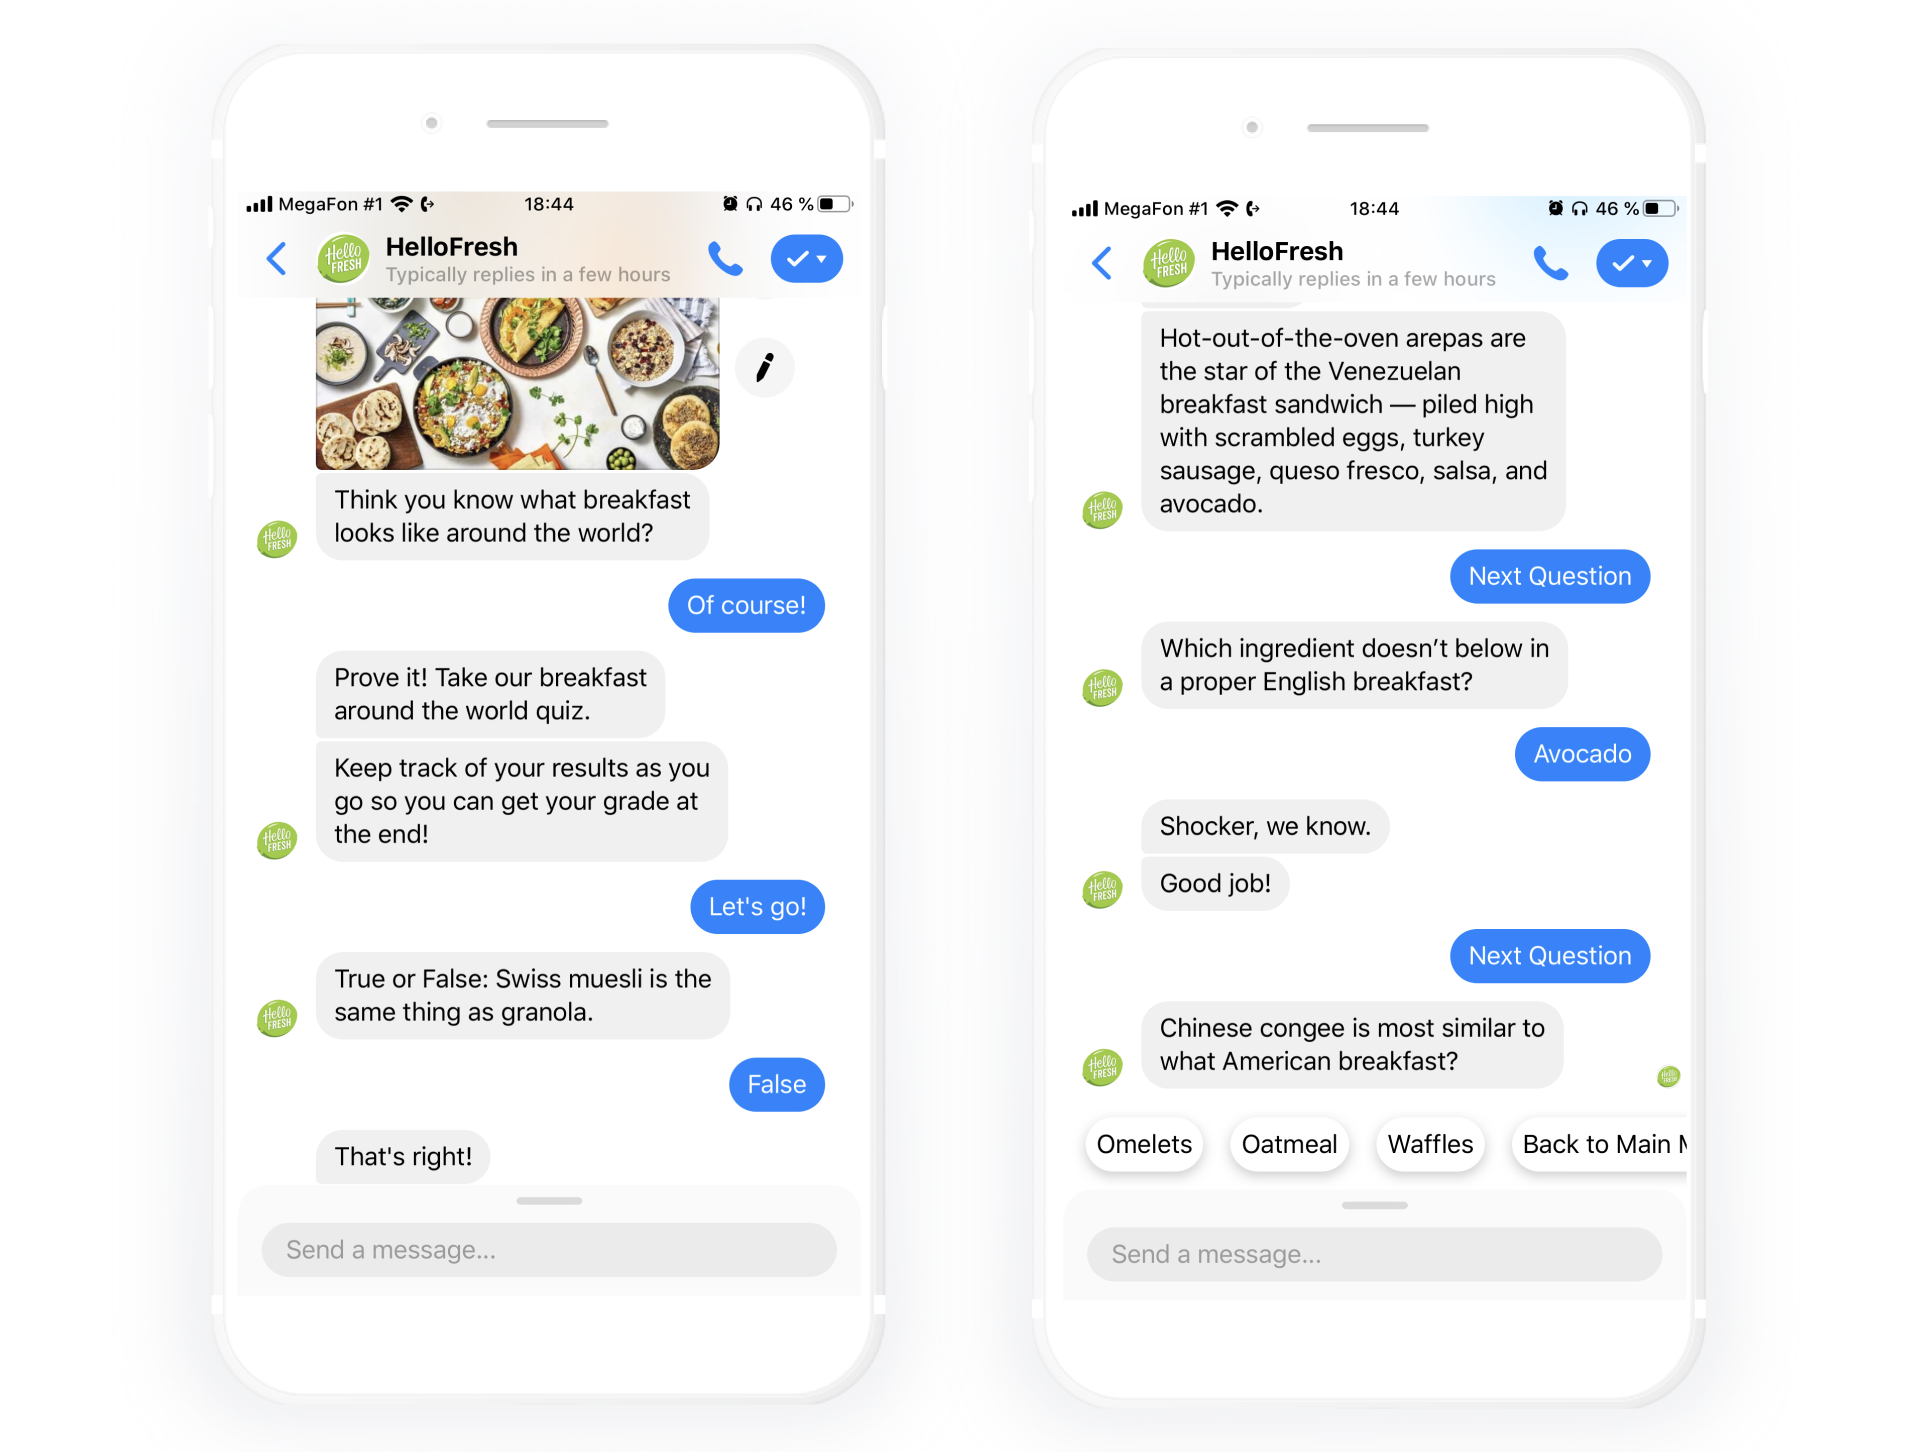 A fun quiz carried out by HelloFresh's chatbot